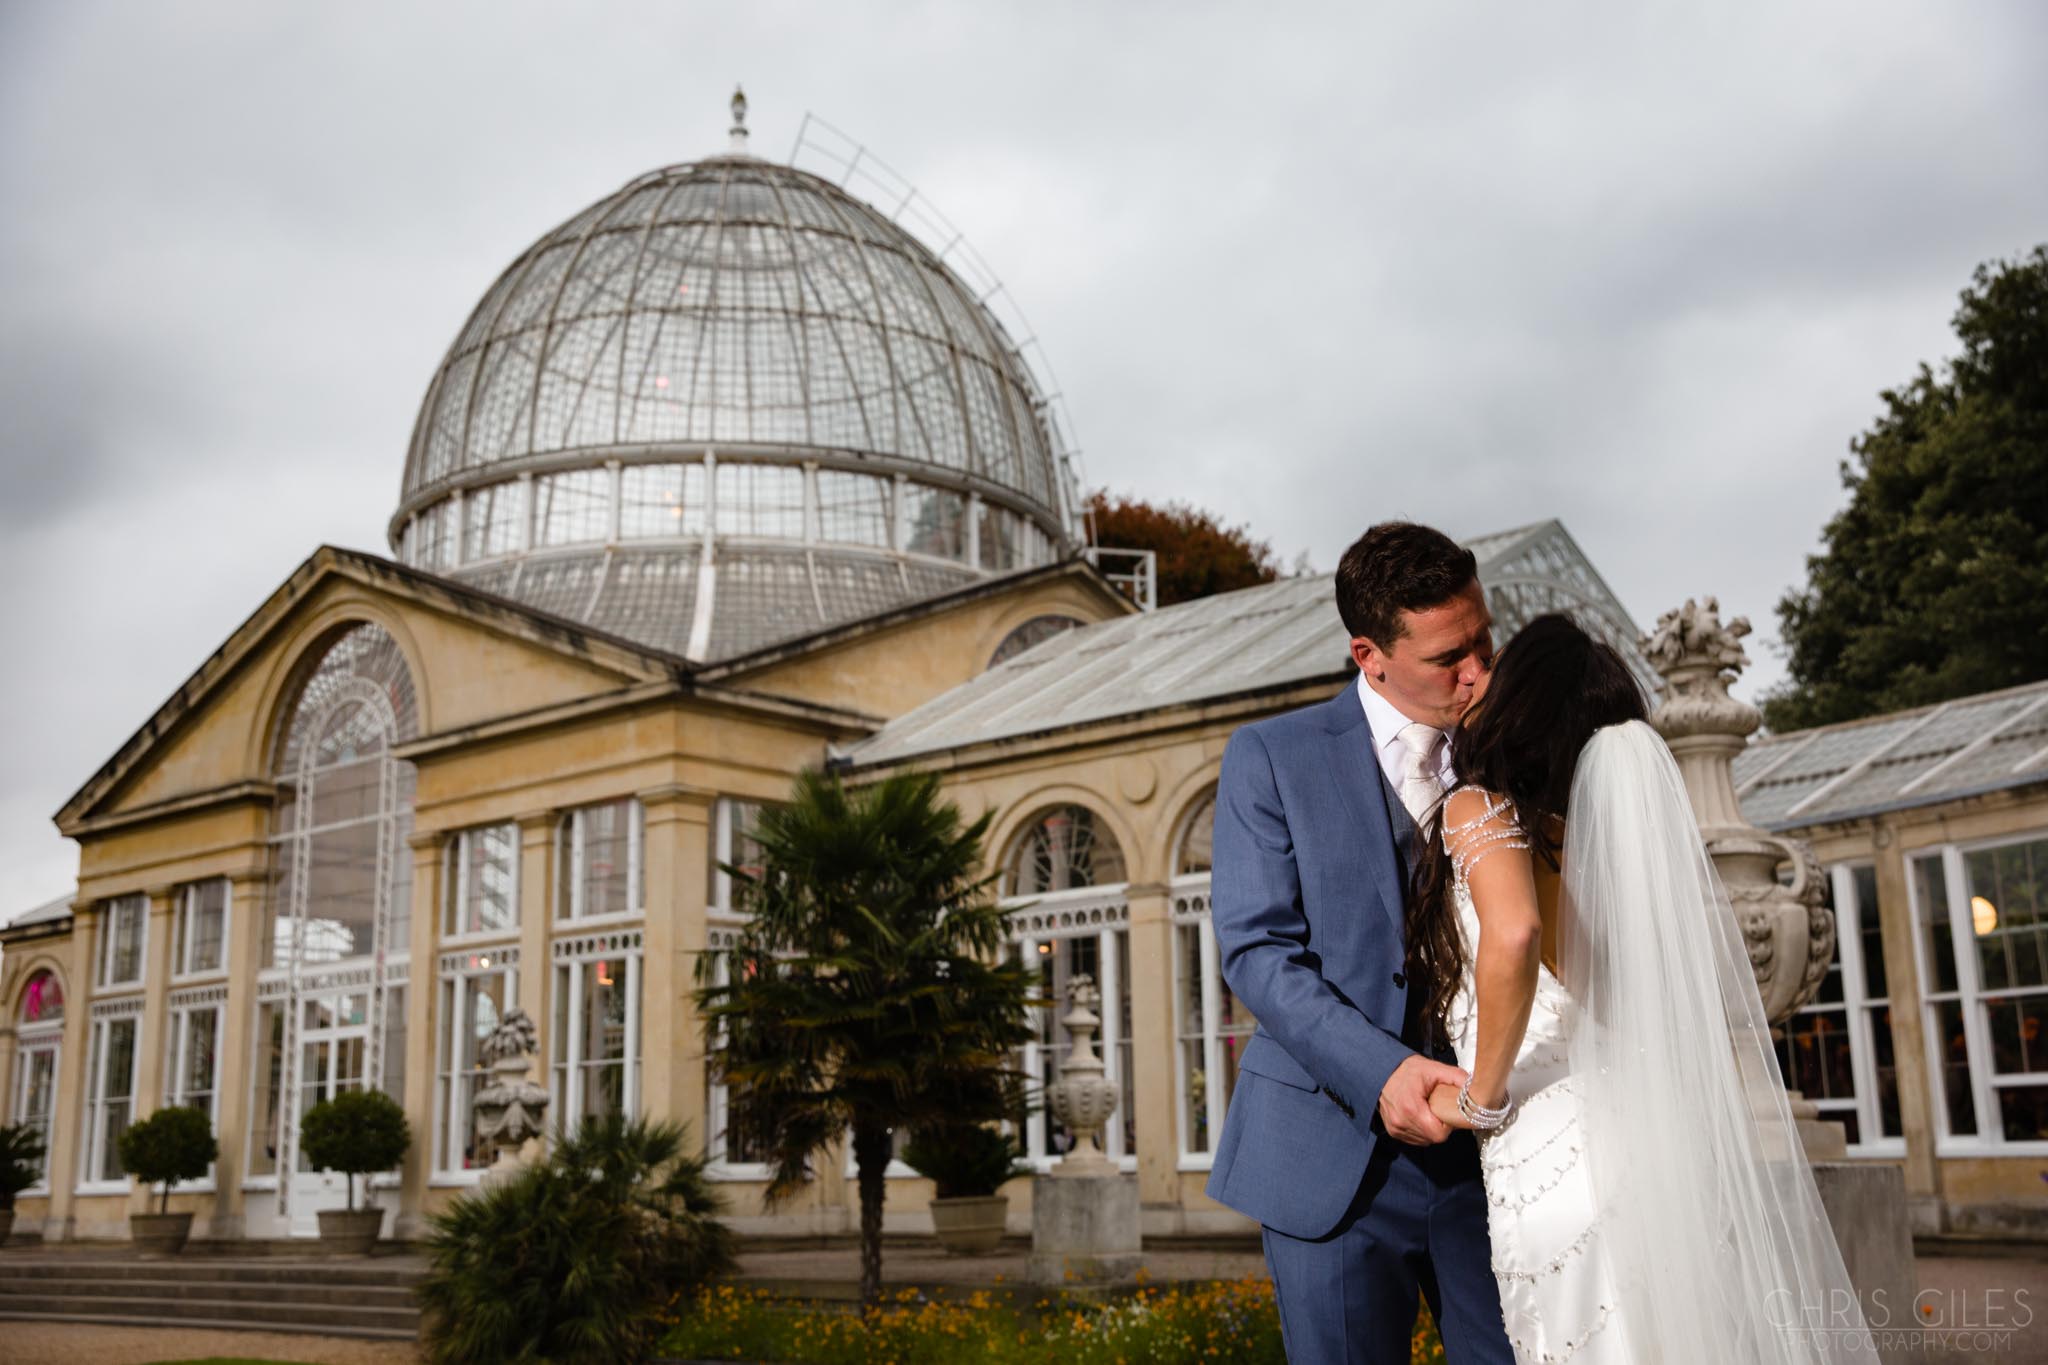 The Great Conservatory at a Wedding at Syon Park